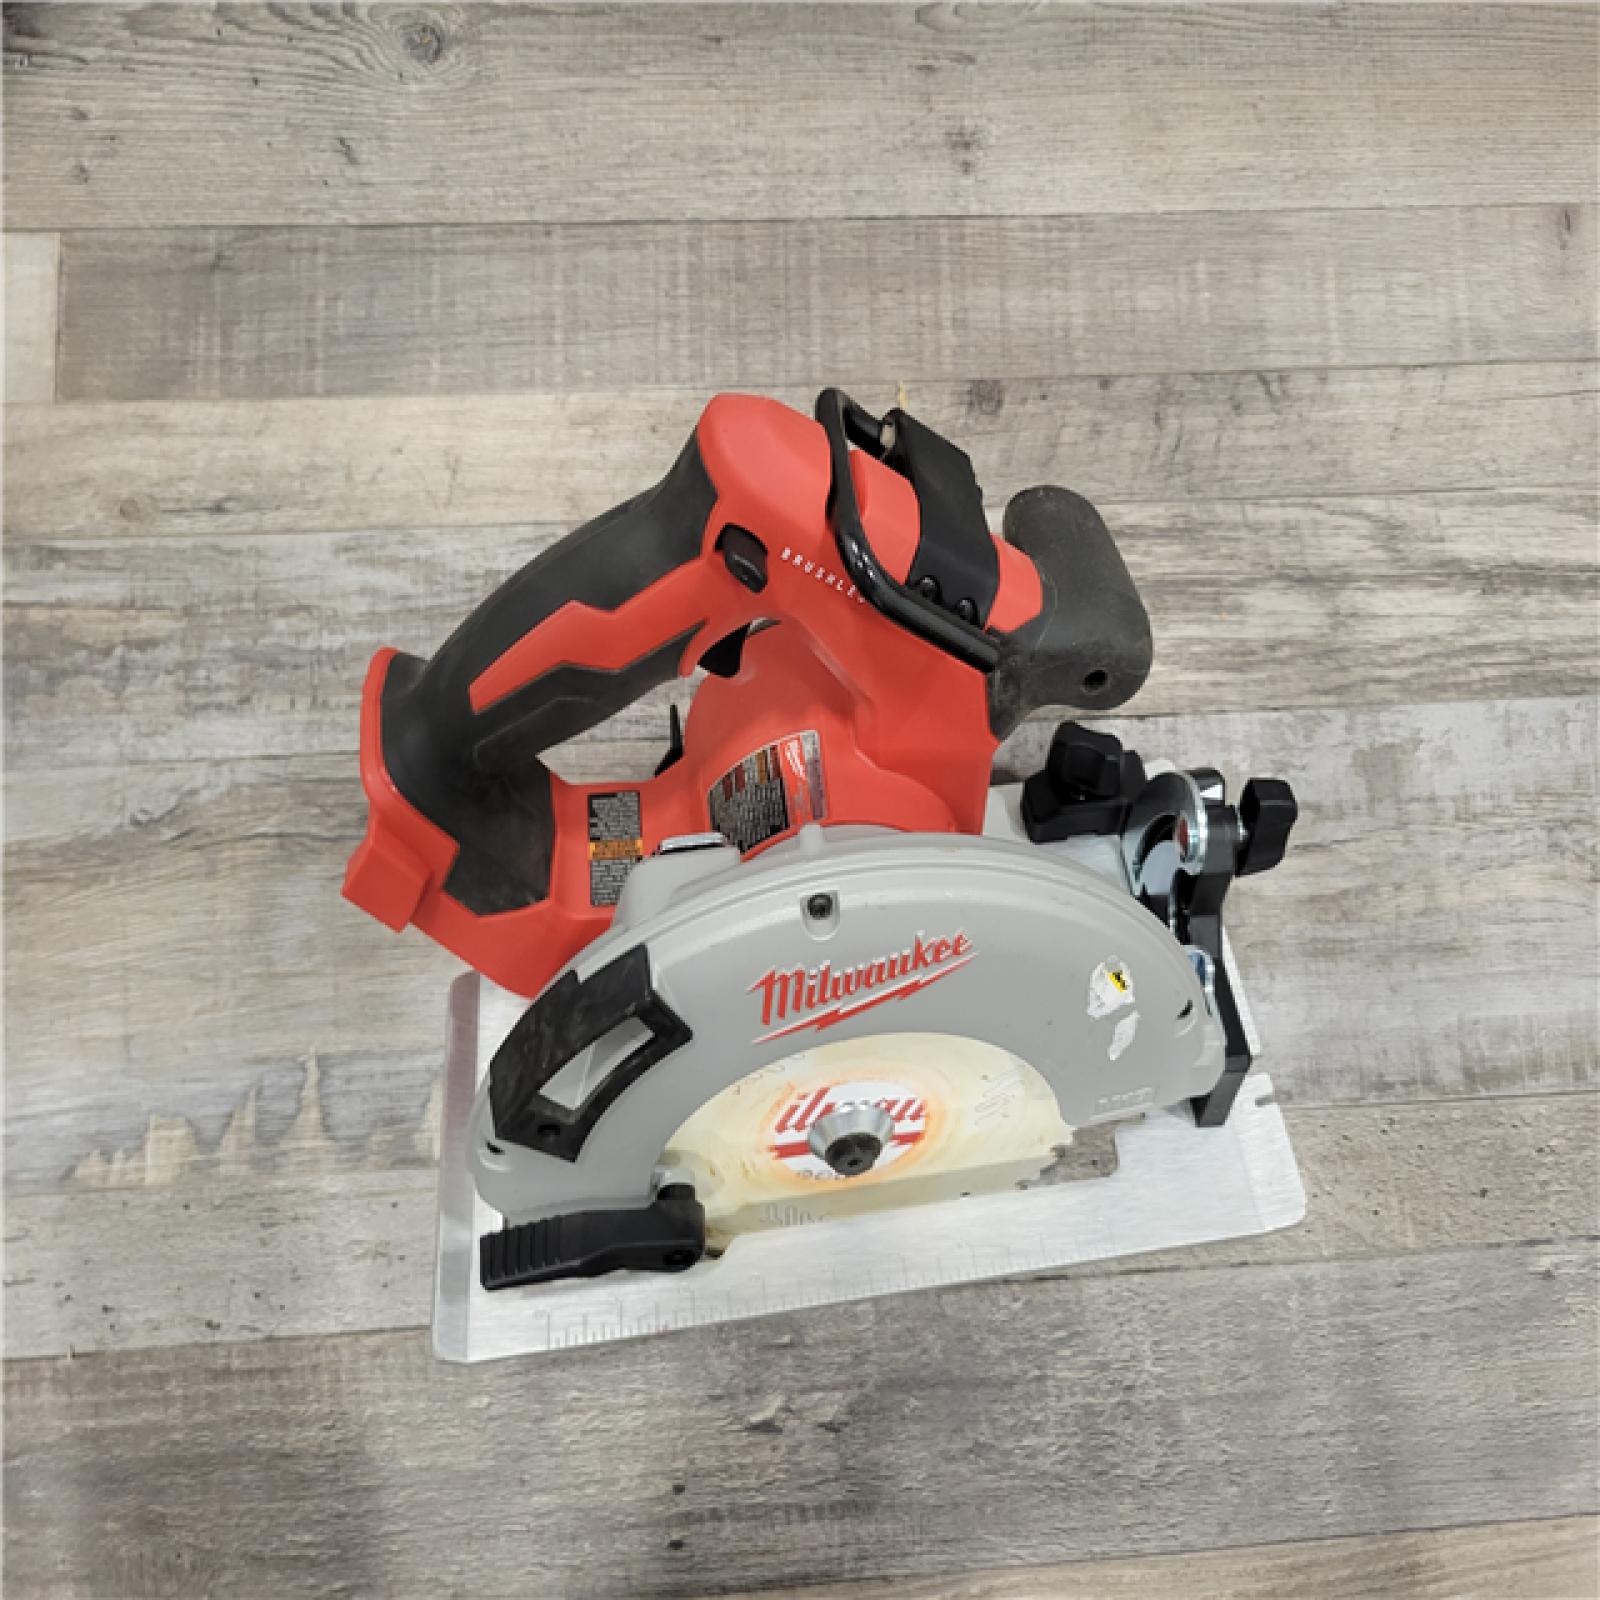 AS-IS Milwaukee M18 Cordless Brushless 7-1/4 in. Circular Saw (Tool Only)